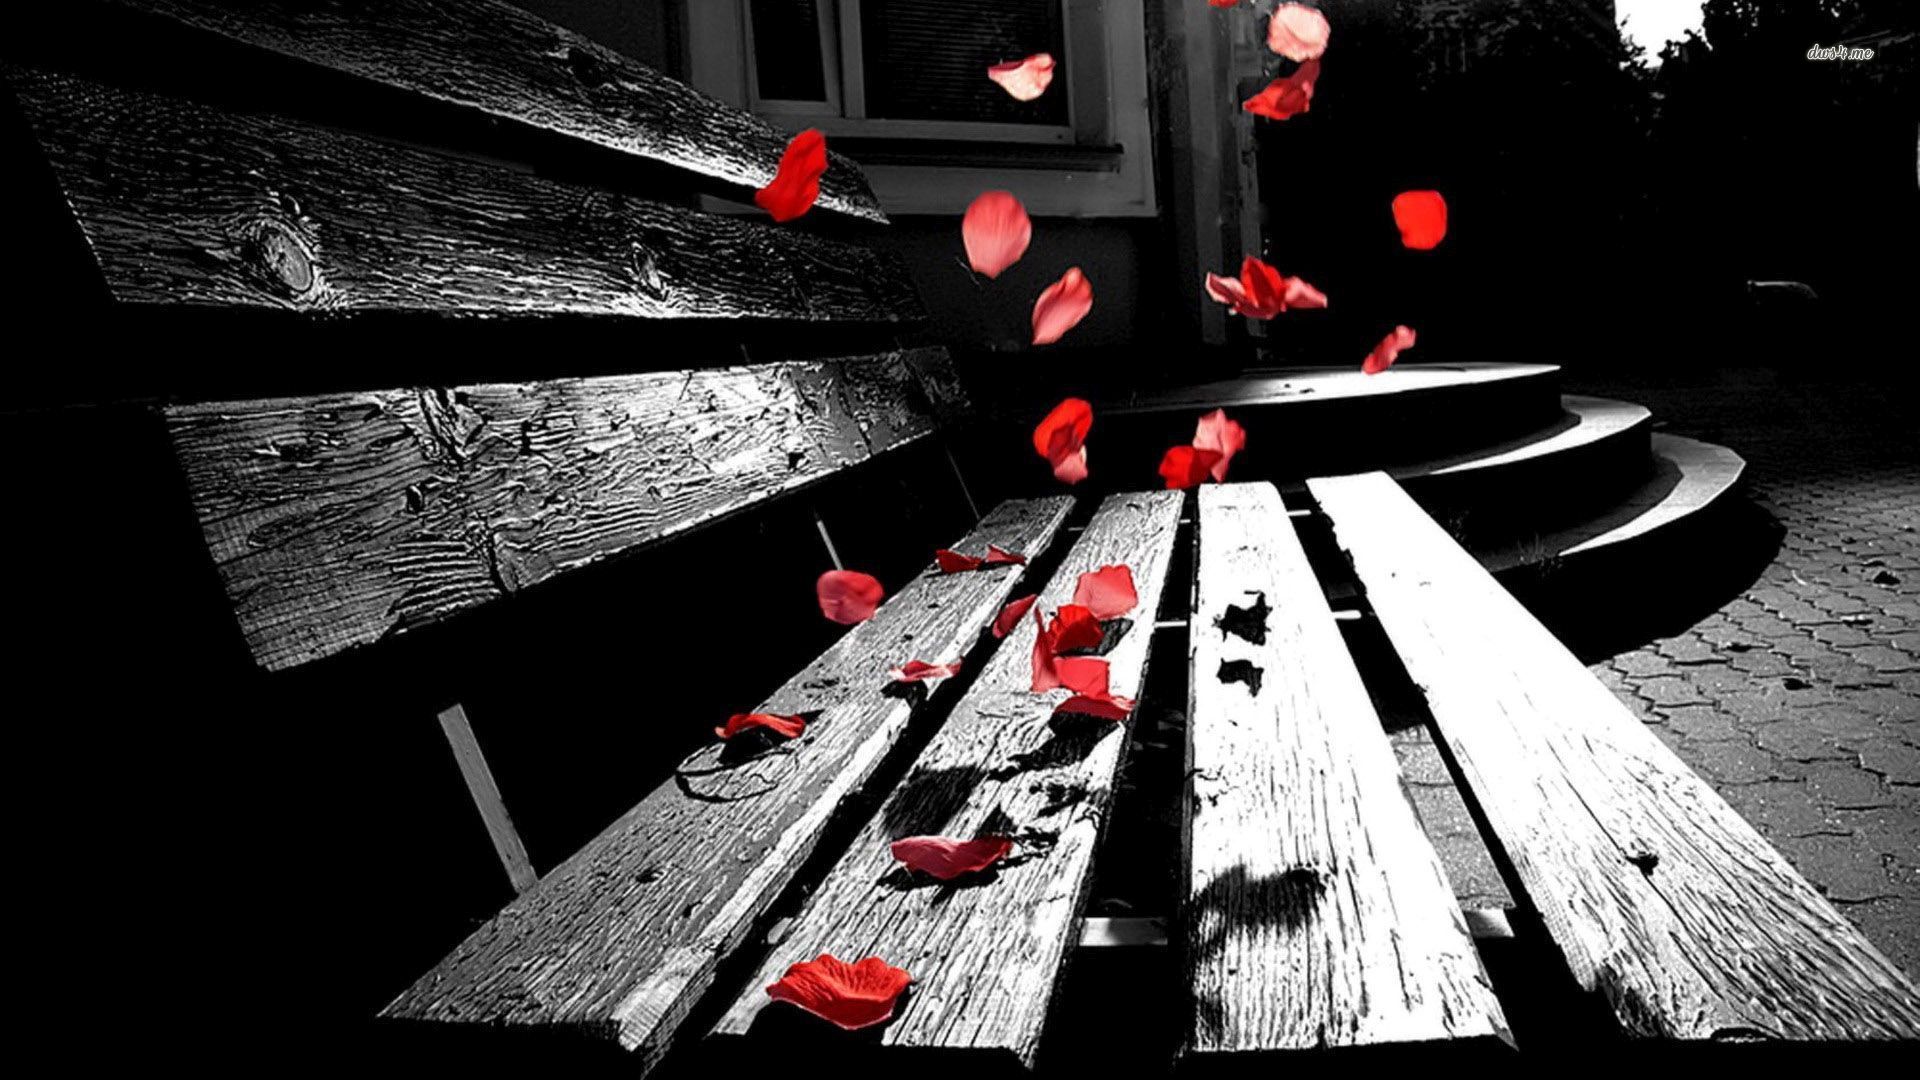 29393-rose-petals-falling-on-a-bench-1920x1080-photography-wallpaper